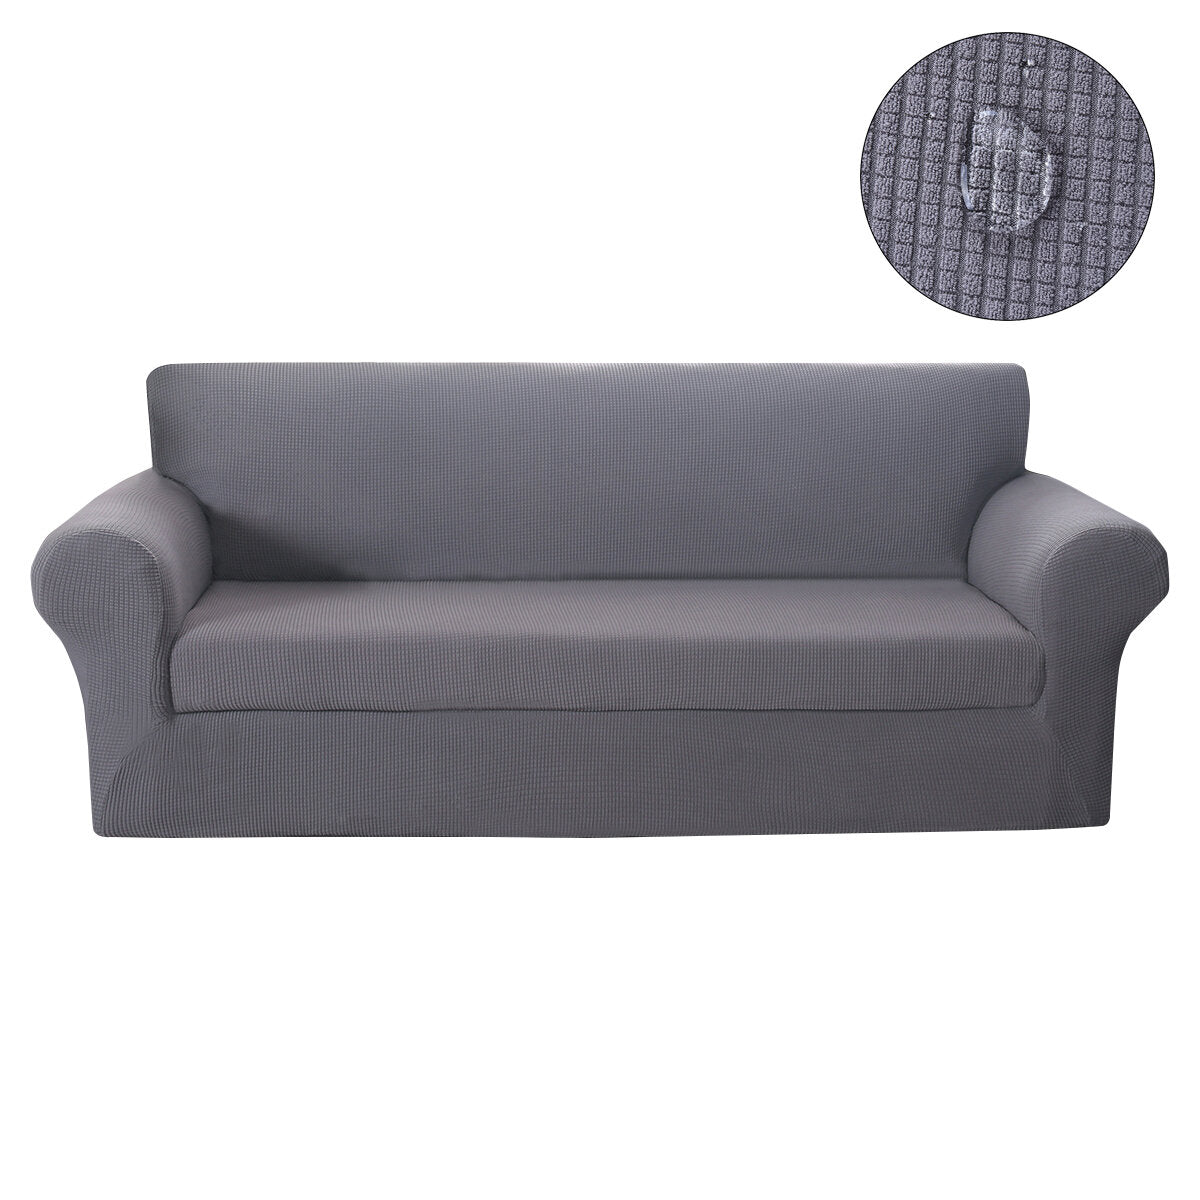 1/2/3/4 Seaters Elastic Sofa Cover Cushion Pillow Cover Chair Seat Protector Stretch Couch Slipcover Home Office Furniture Accessories Decorations